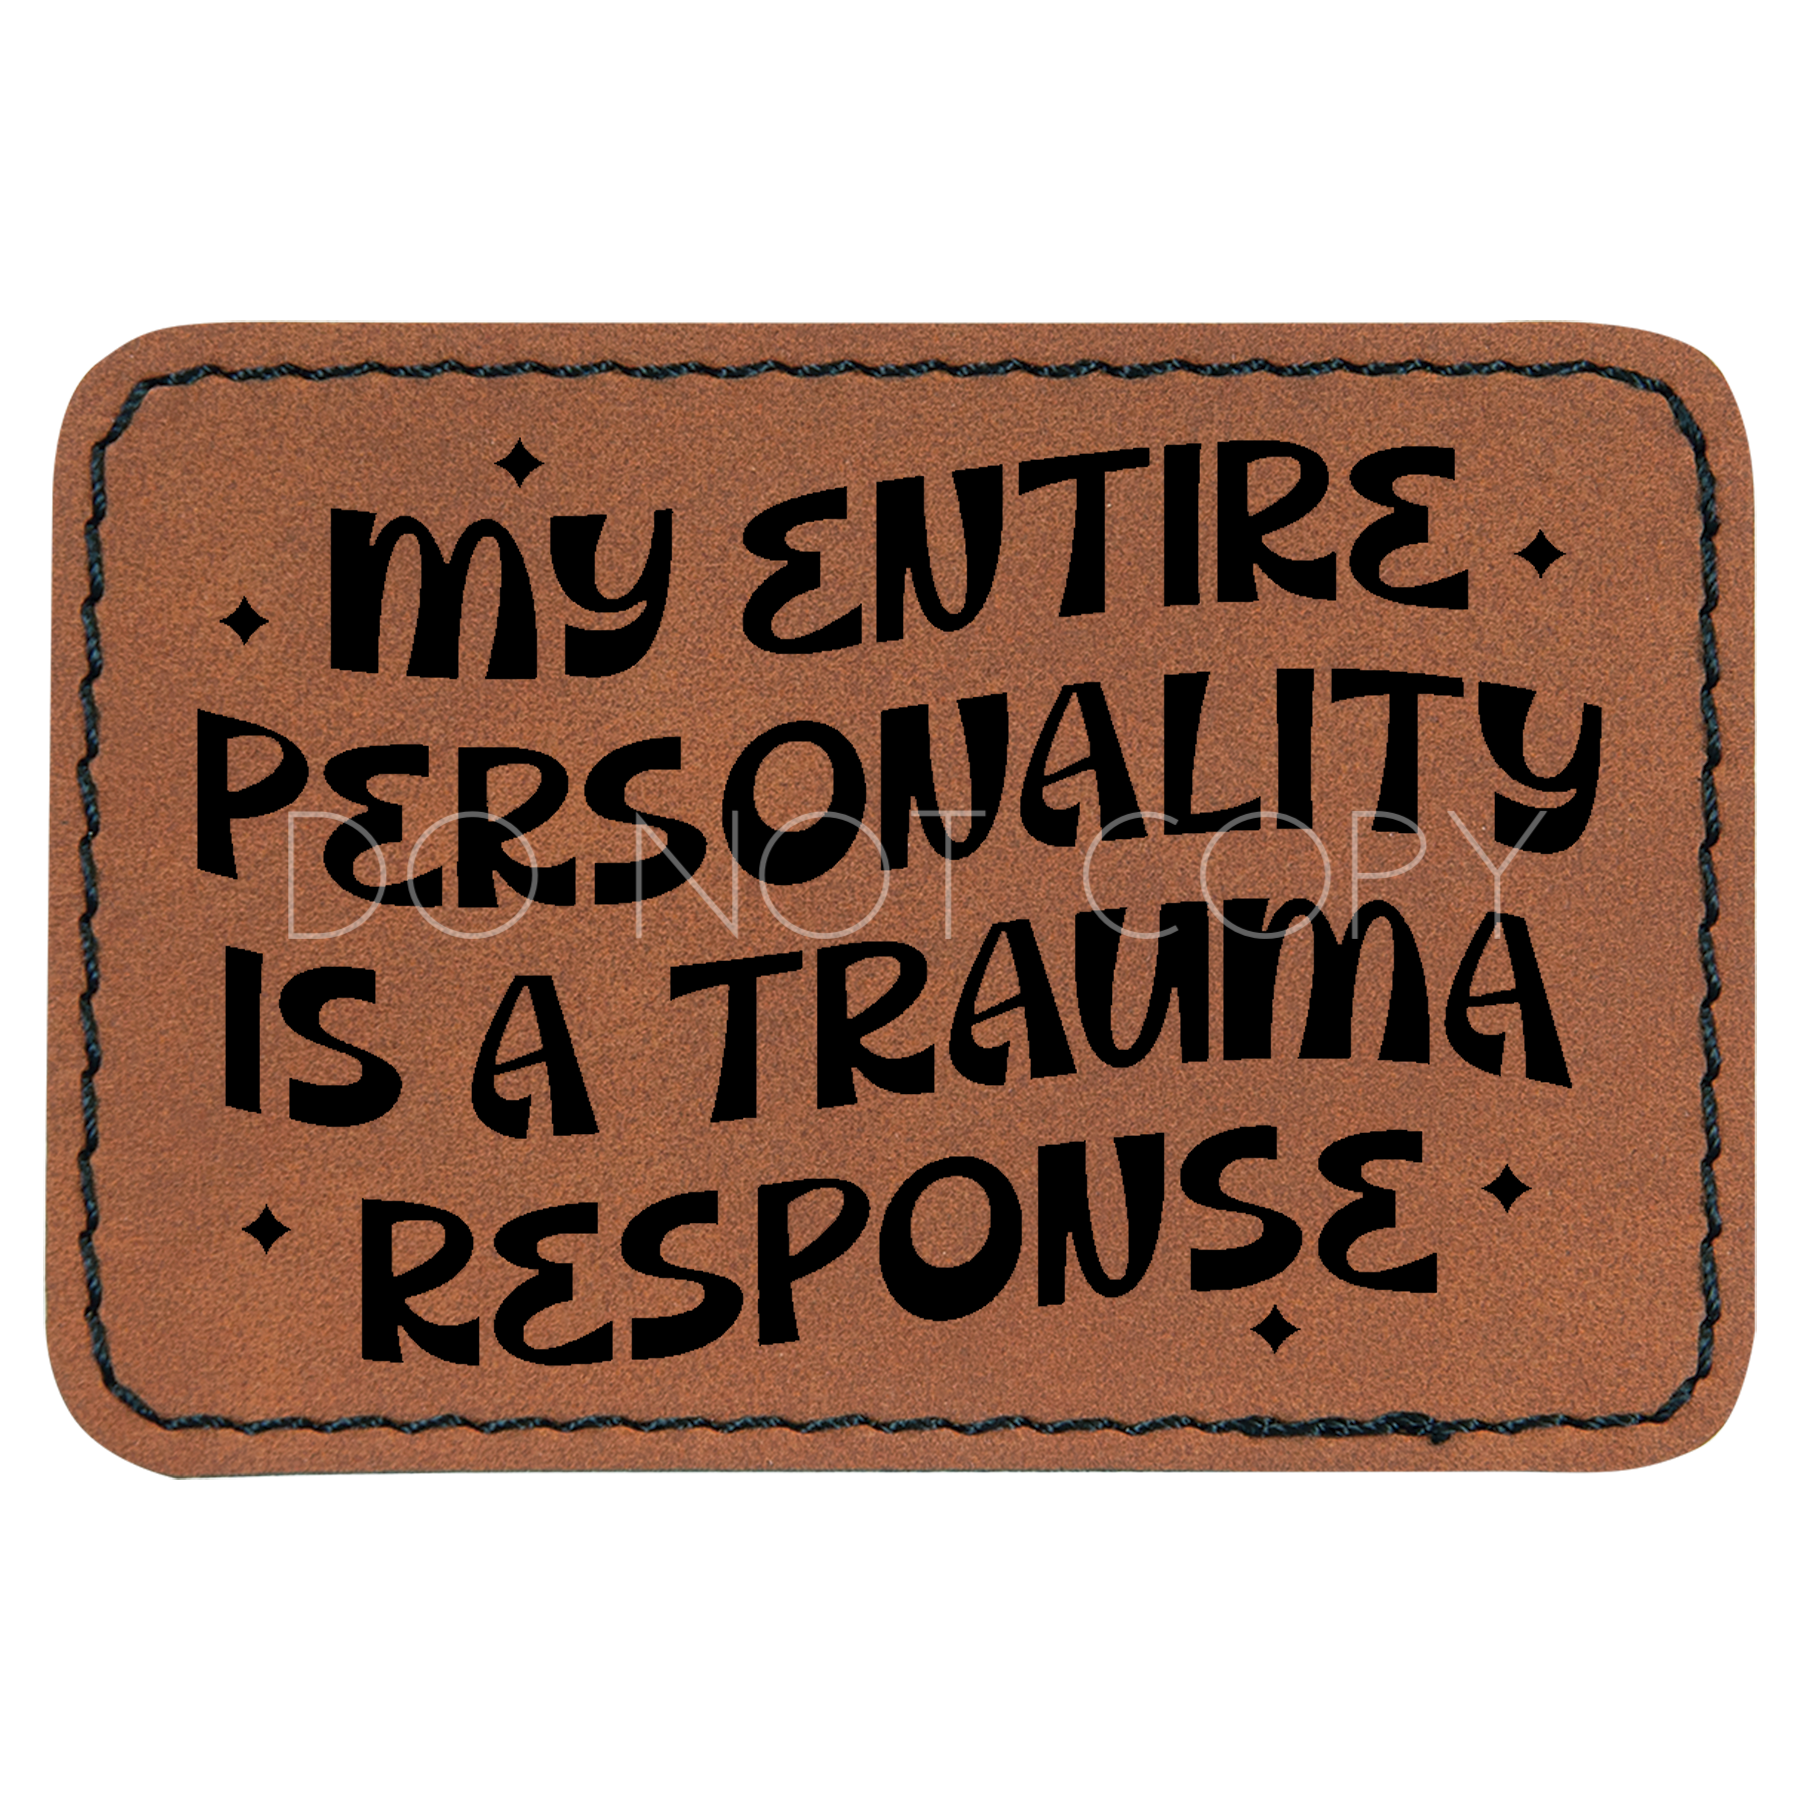 My Entire Personality Is A Trauma Response Patch